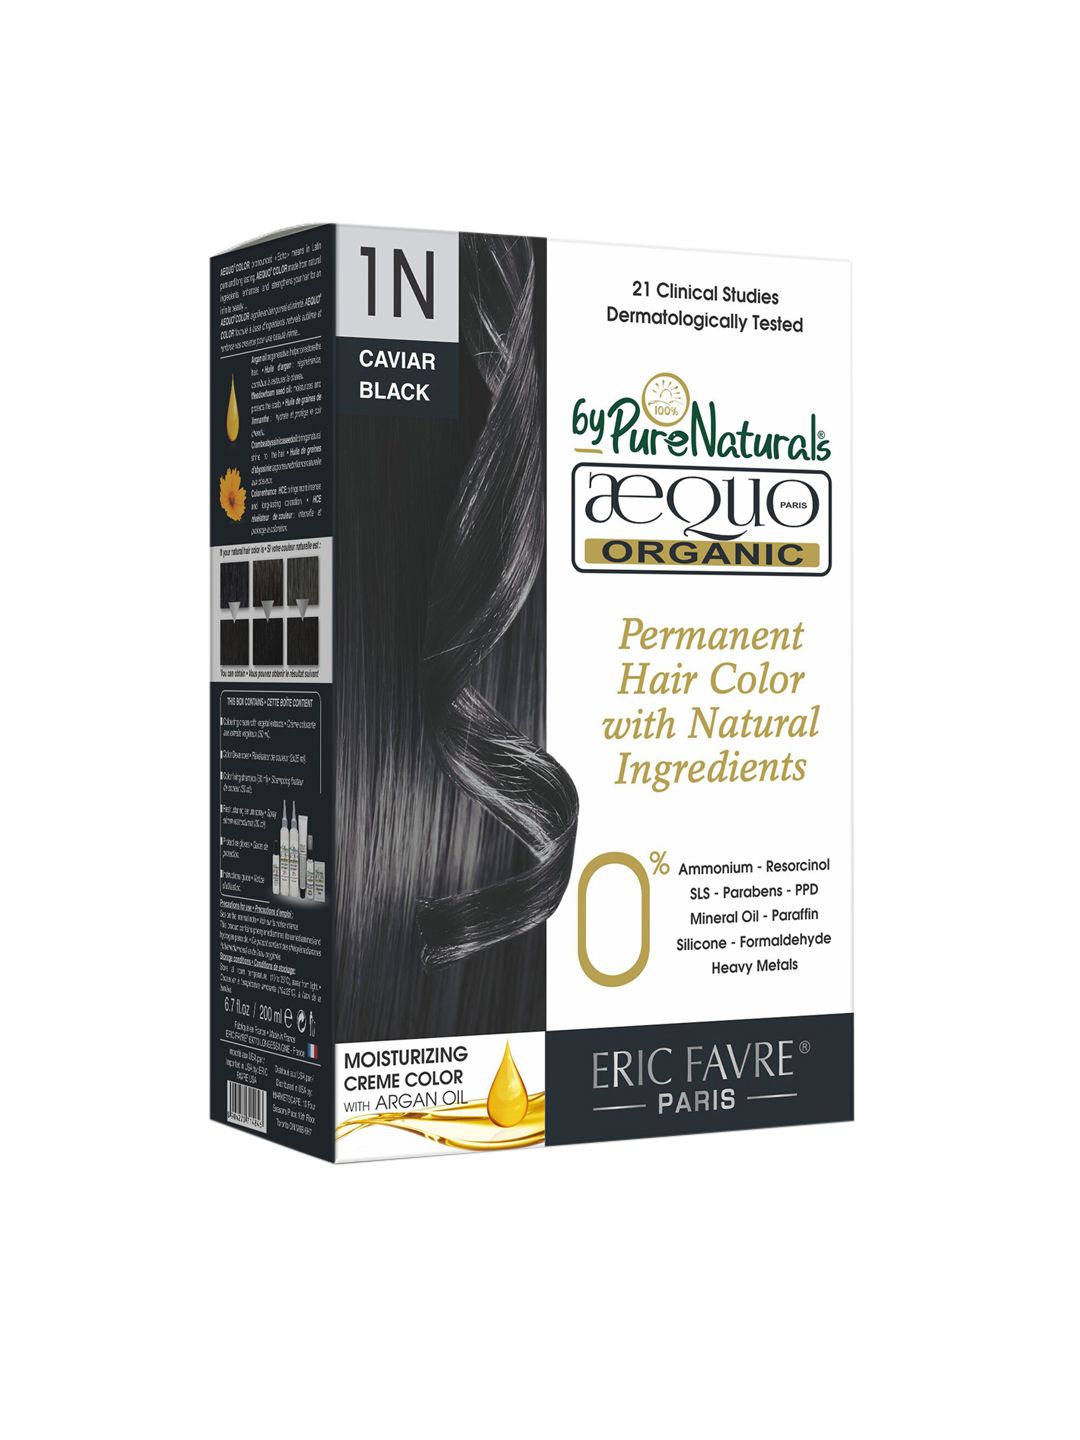 Aequo Organic Dermatologist Recommended Permanent Cream Hair Color Kit - 1N Caviar Jet Black - 160 ml Price in India